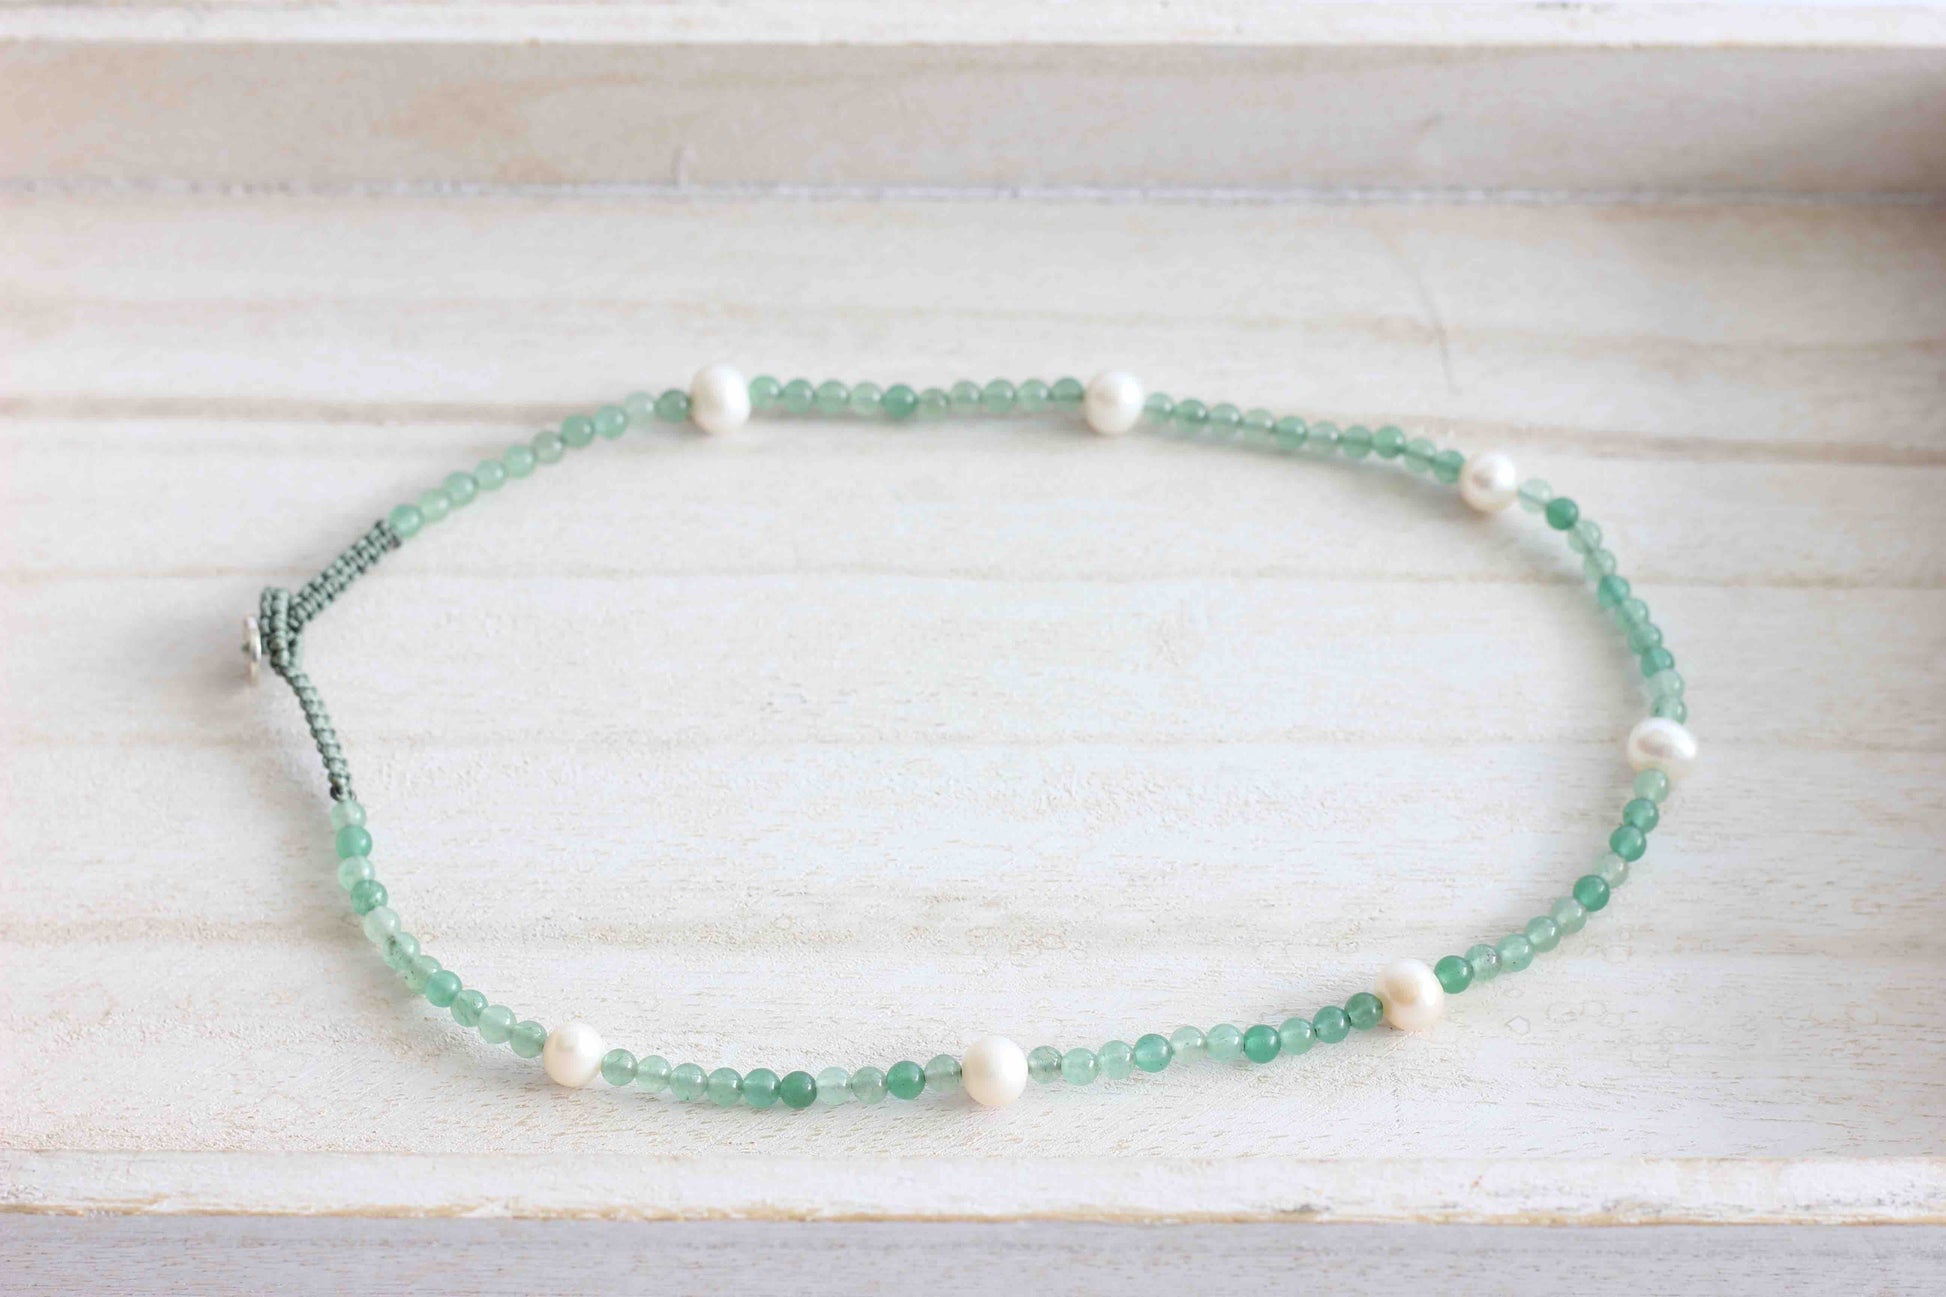 Green Aventurine Pearl Necklace, Pearl Necklace, Green Aventurine Necklace, Gemstone Necklace, Necklace for Women, Green Gemstone